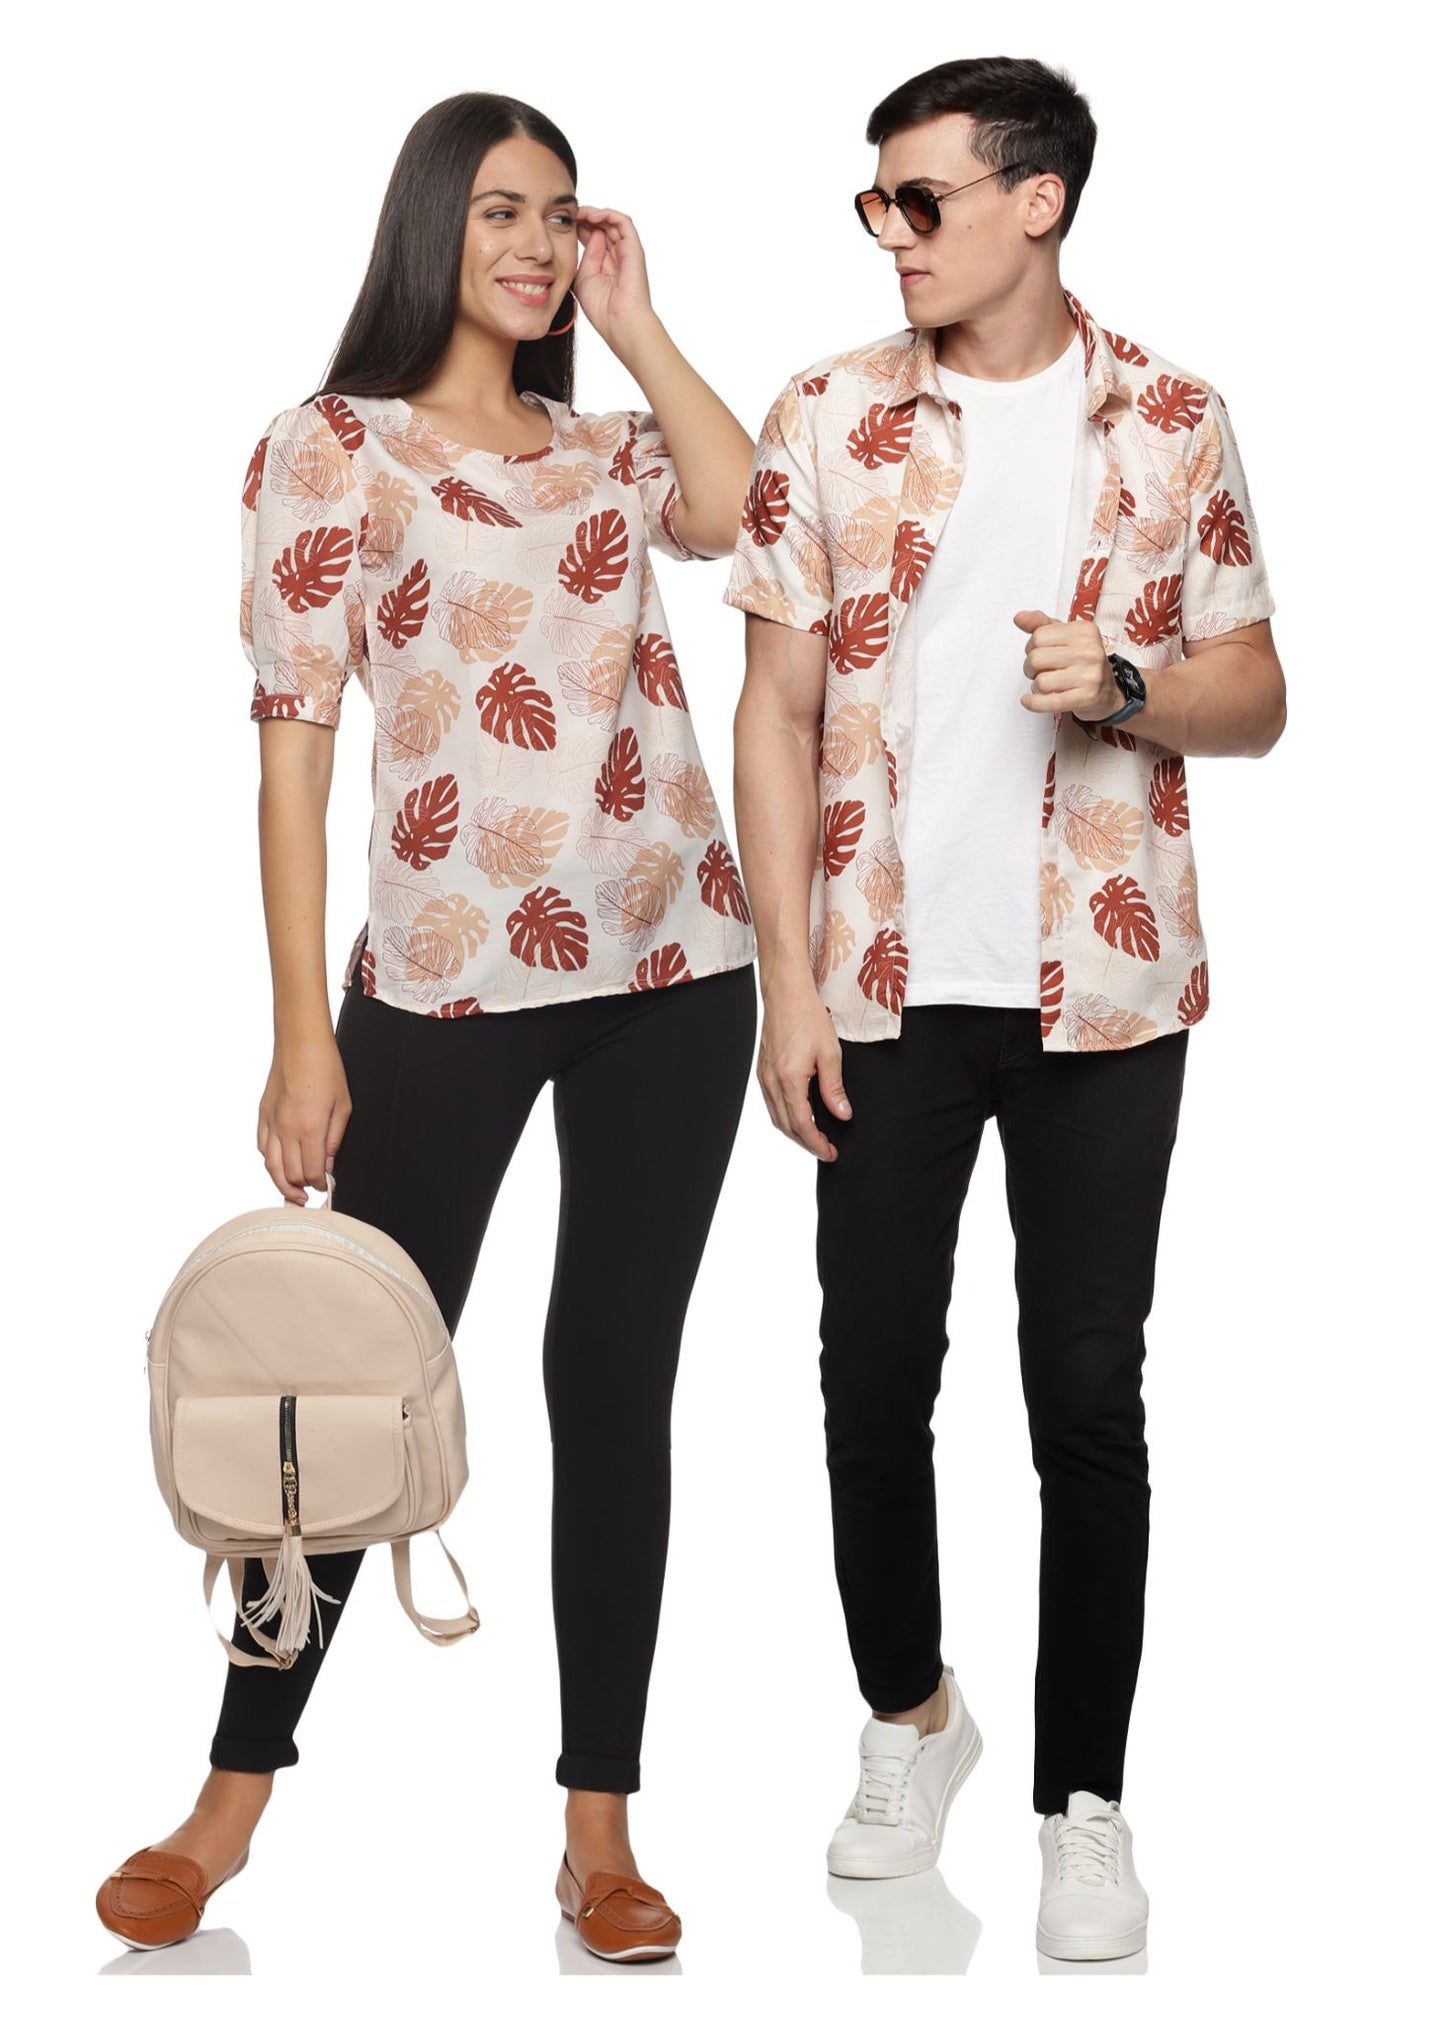 Perfect Matching Couple Outfits For A Picturesque Outdoor Shoot – Shopzters